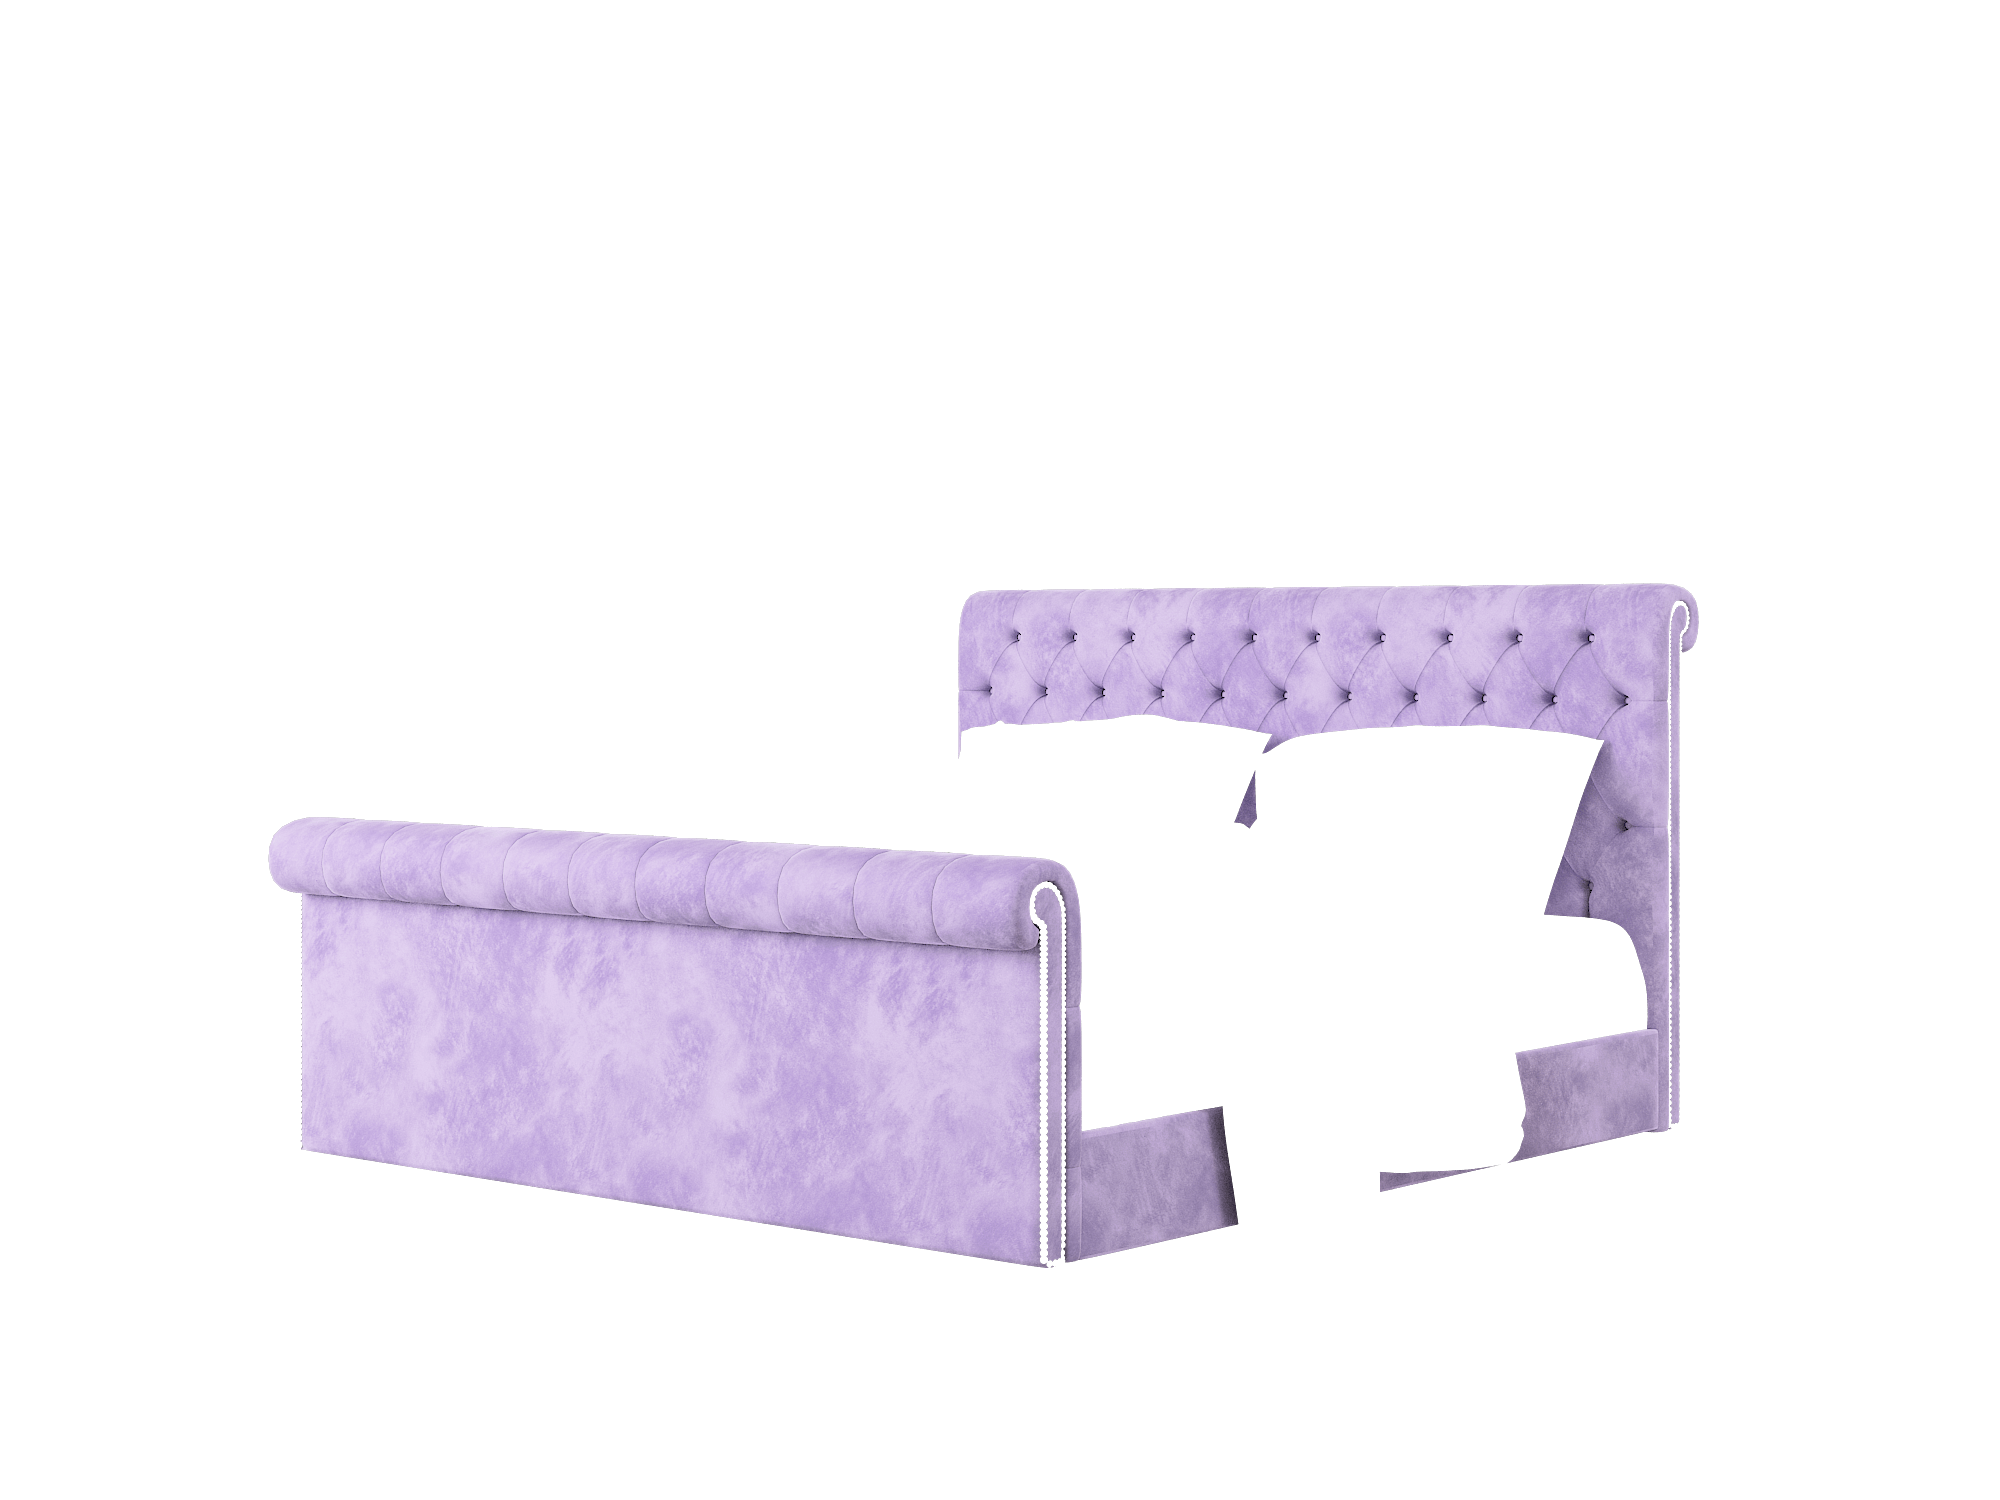 Kaila Royale Lavender Bed King Room Texture